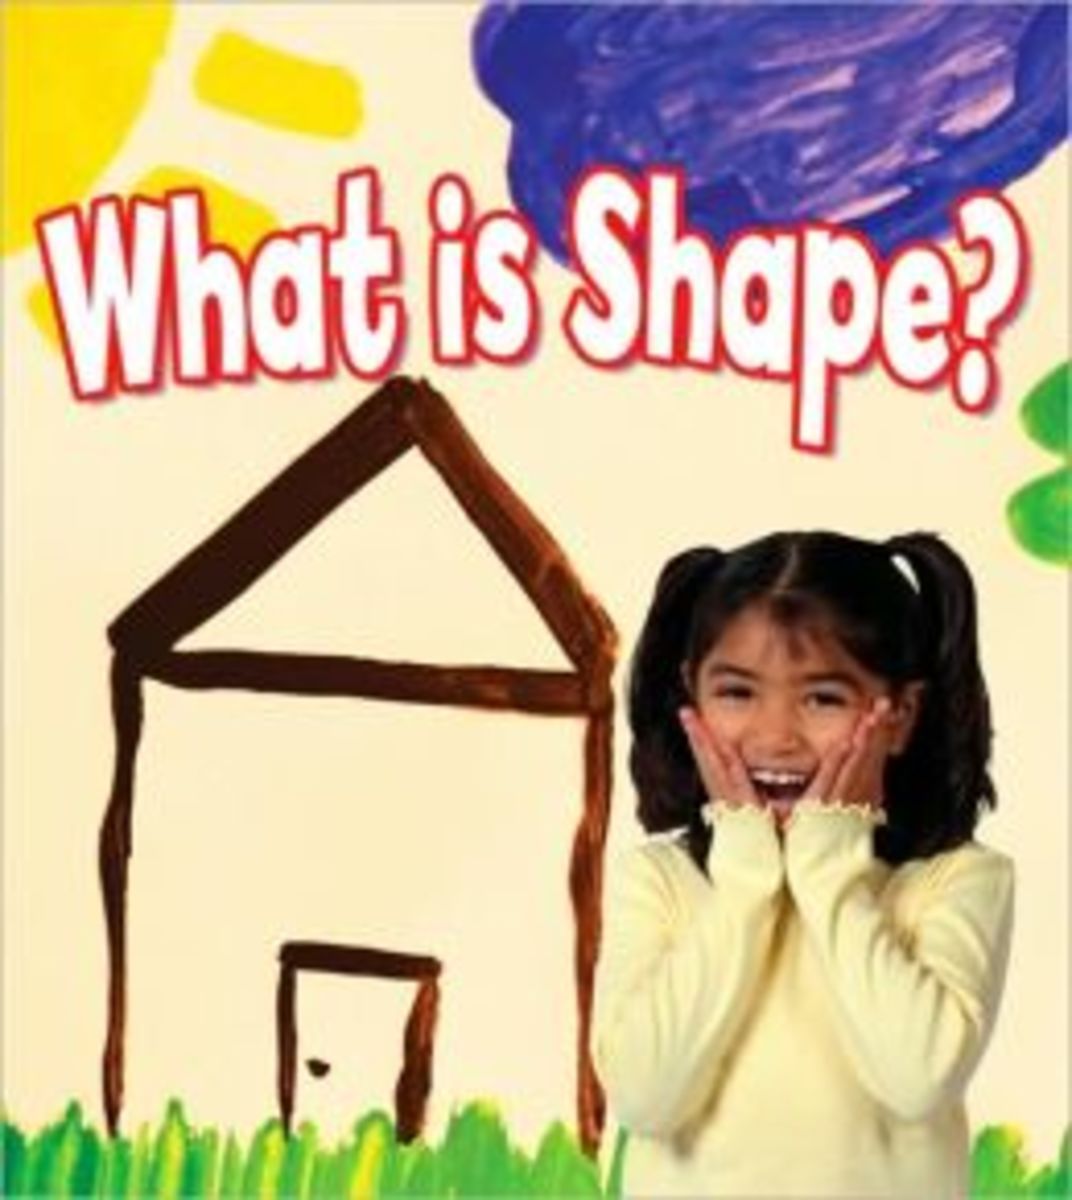 Did you learn what SHAPE is in Junior Kindergarten? Why not? Were you chewing gum and texting in the back of the class? Were you playing hooky or perhaps smoking joints behind the school? If so, then this article is for you...boy is it ever!